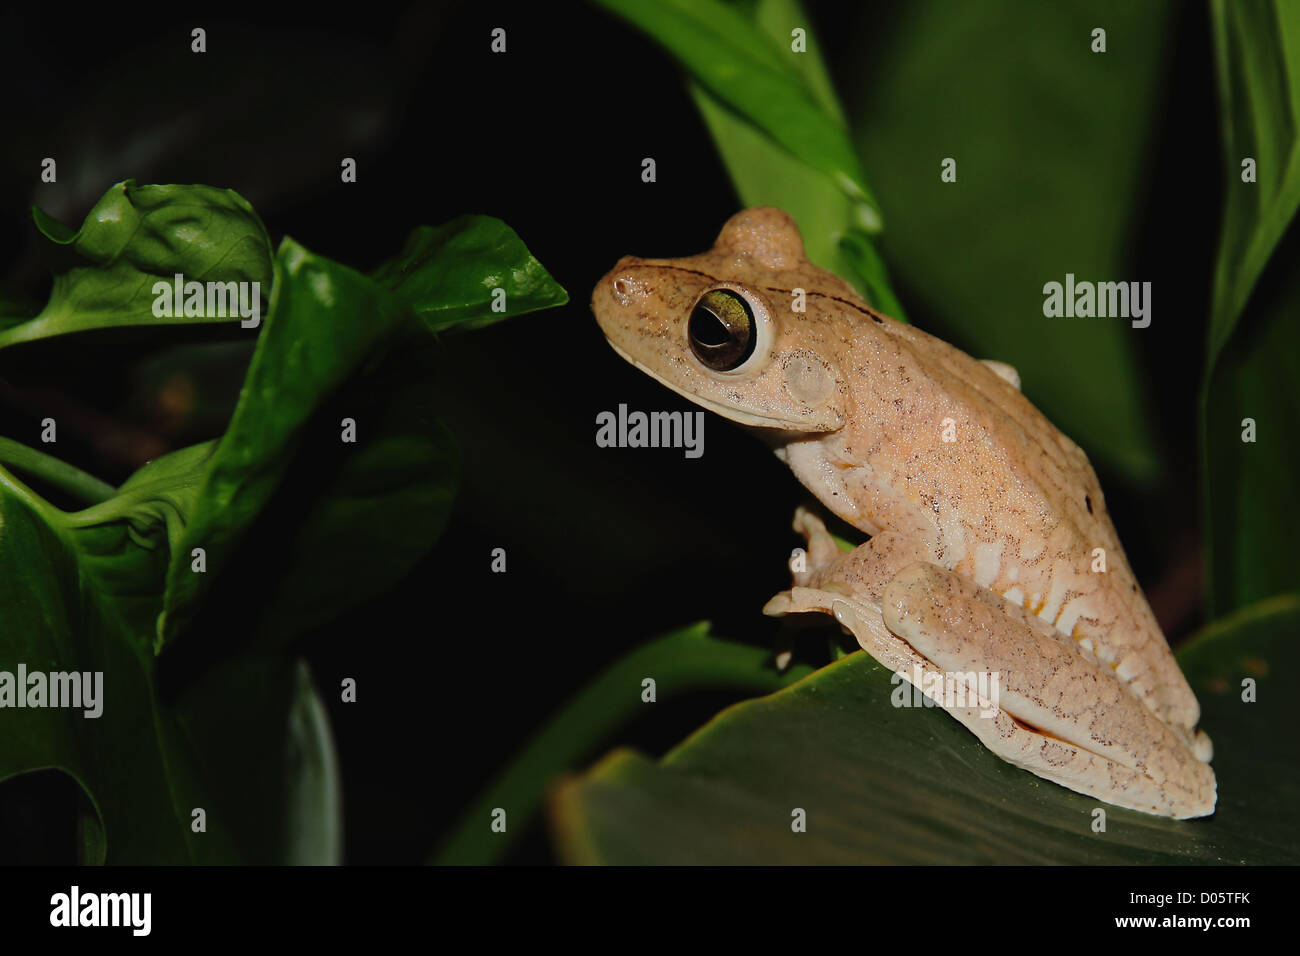 Lateral close up of a Gladiator Tree Frog (Hypsiboas rosenbergi) sitting on a leaf at night in Manuel Antonio, Costa Rica. Stock Photo